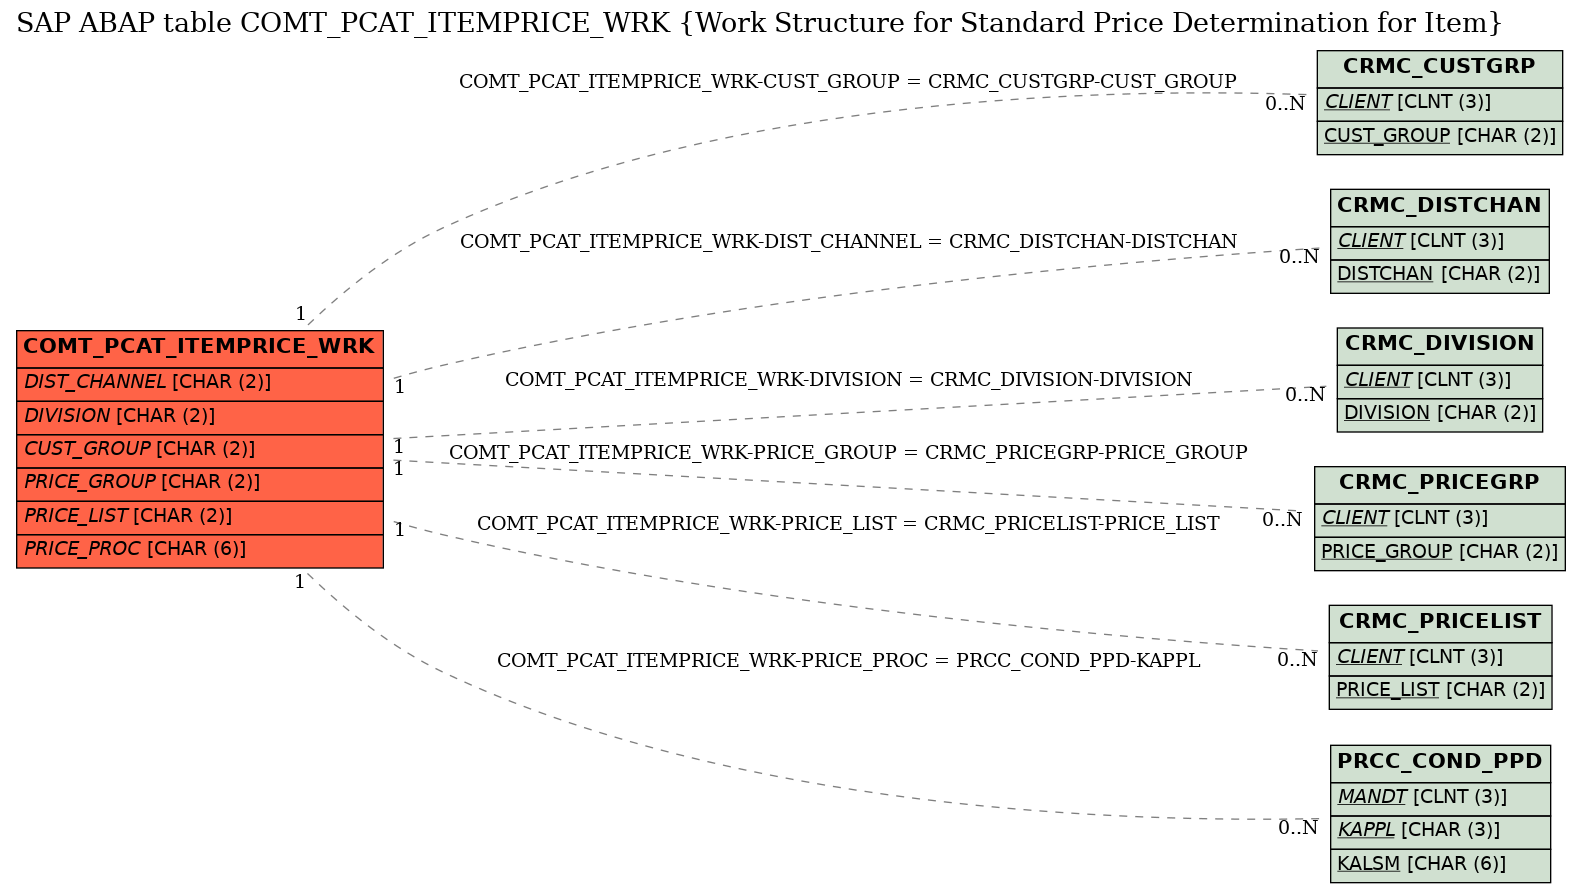 E-R Diagram for table COMT_PCAT_ITEMPRICE_WRK (Work Structure for Standard Price Determination for Item)